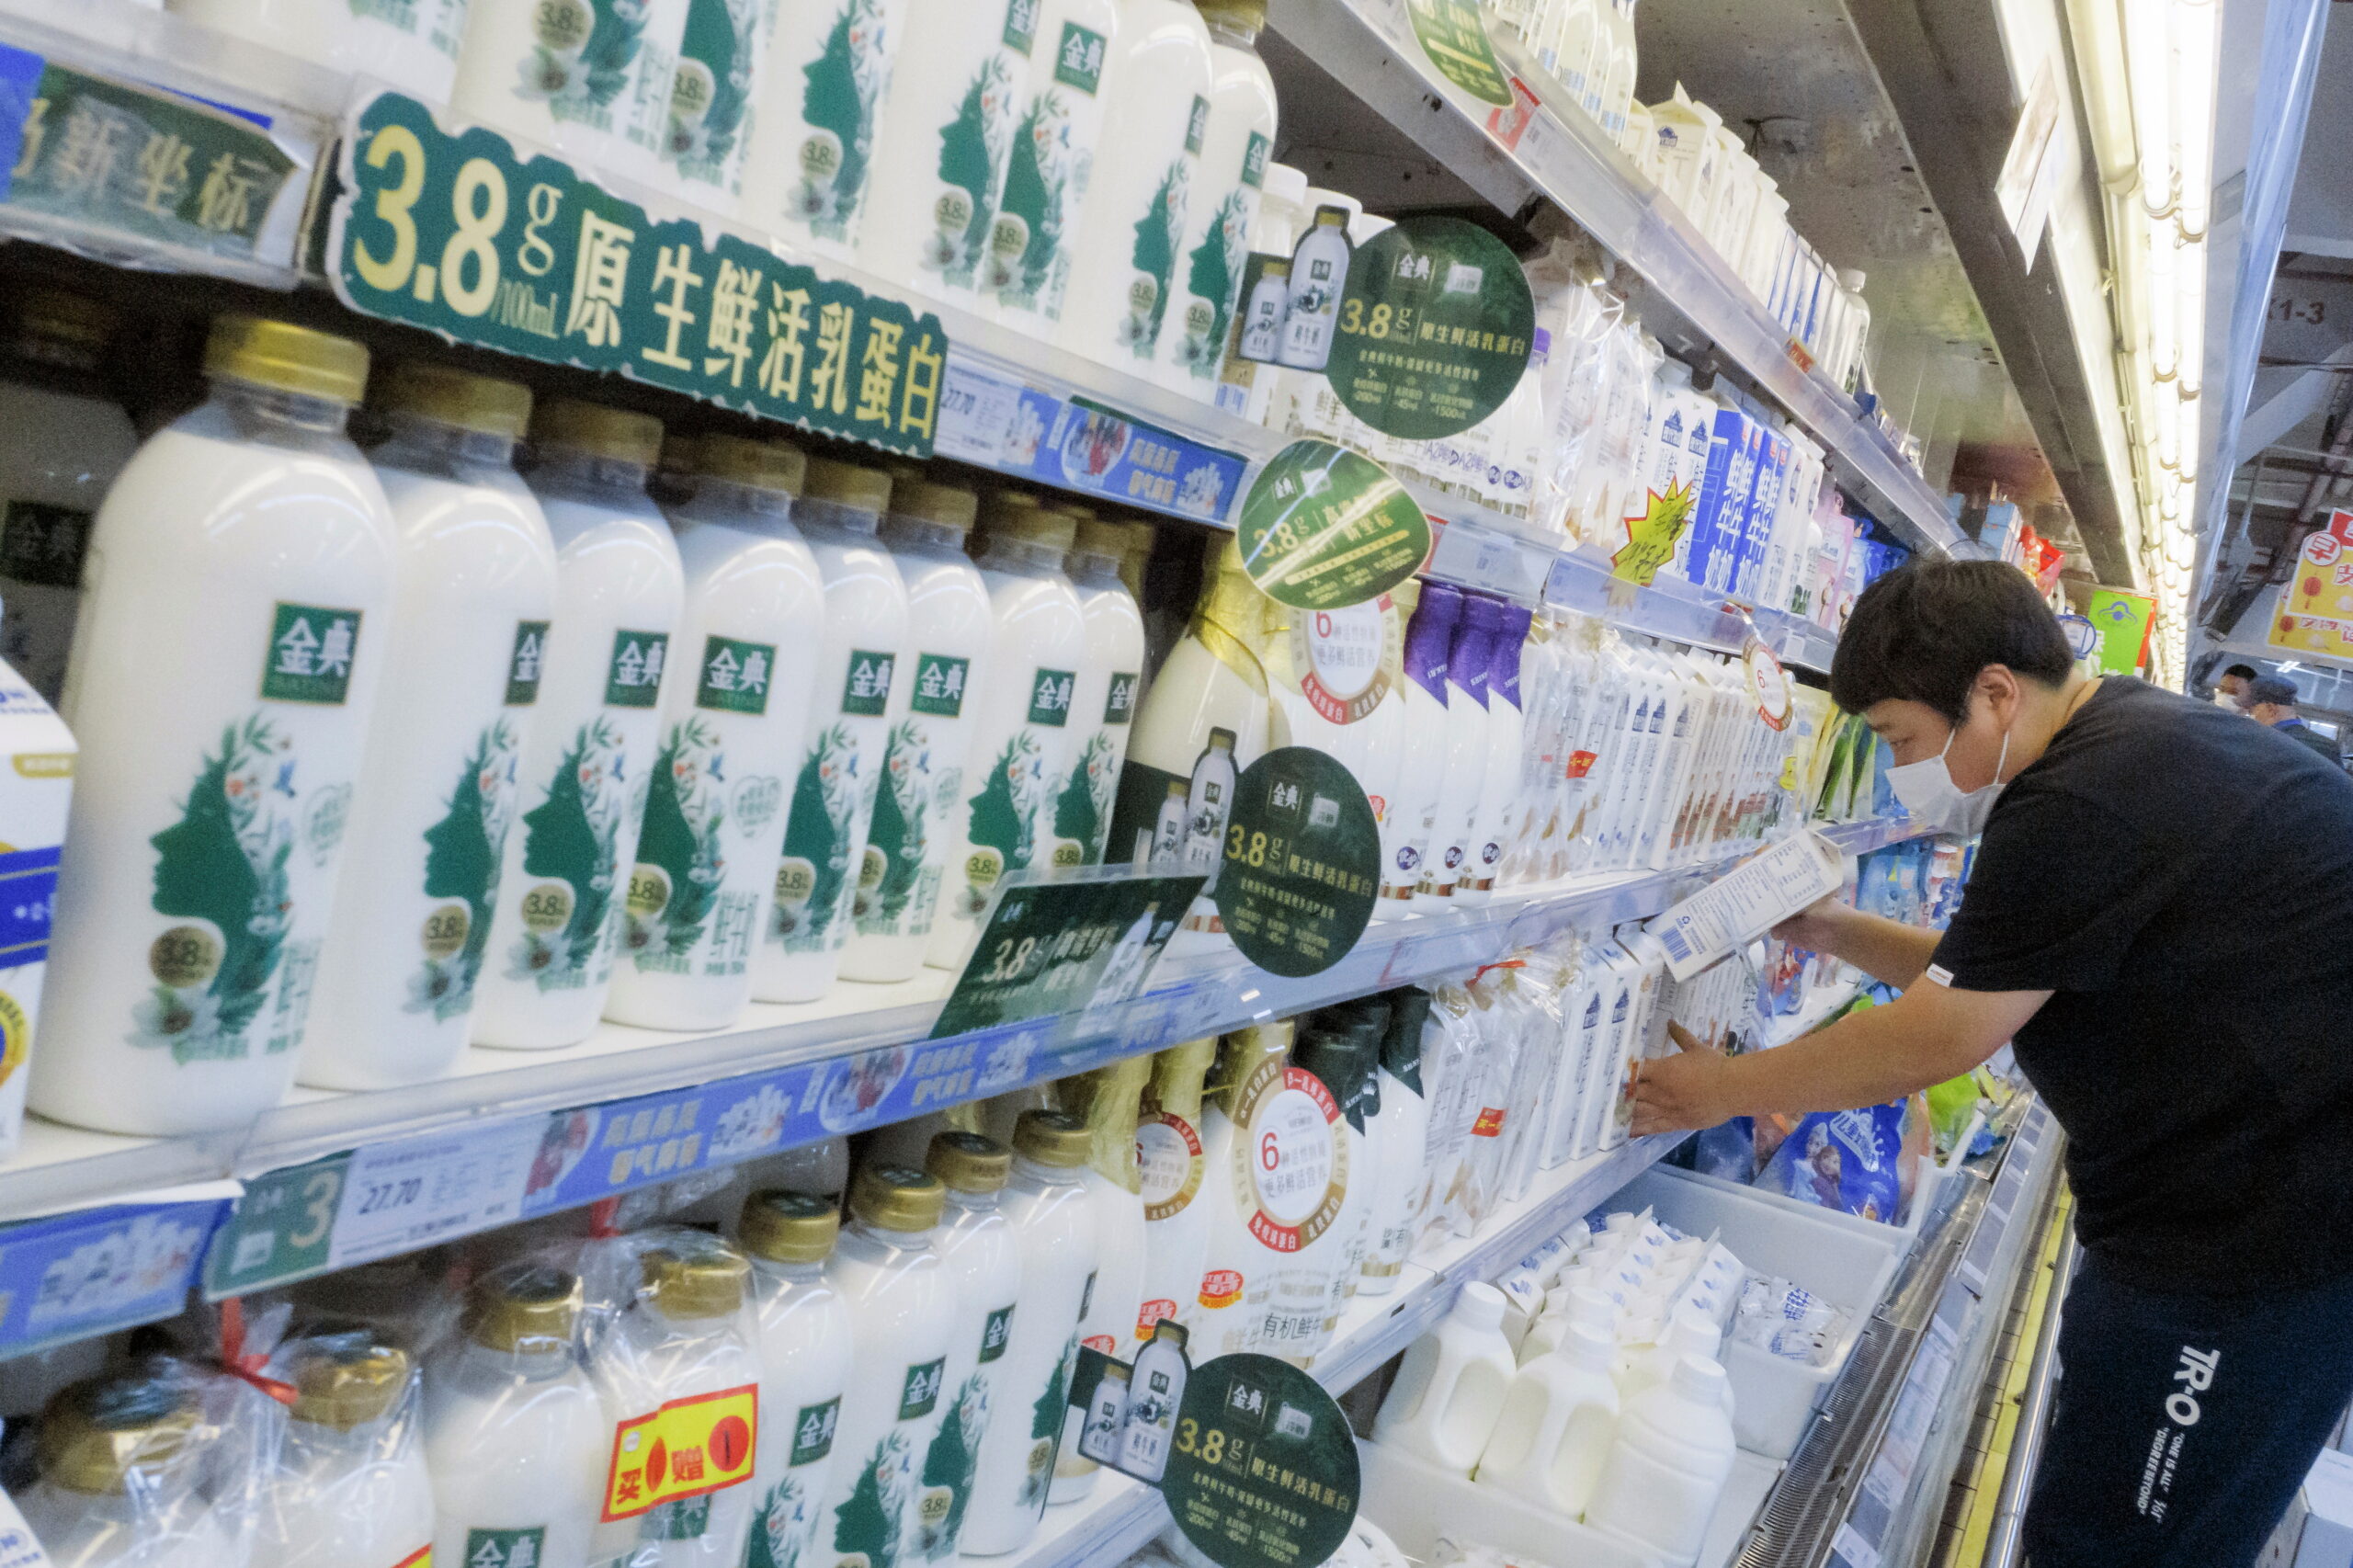 China’s continued absence from dairy market weighs on milk prices - Dairy News 7X7